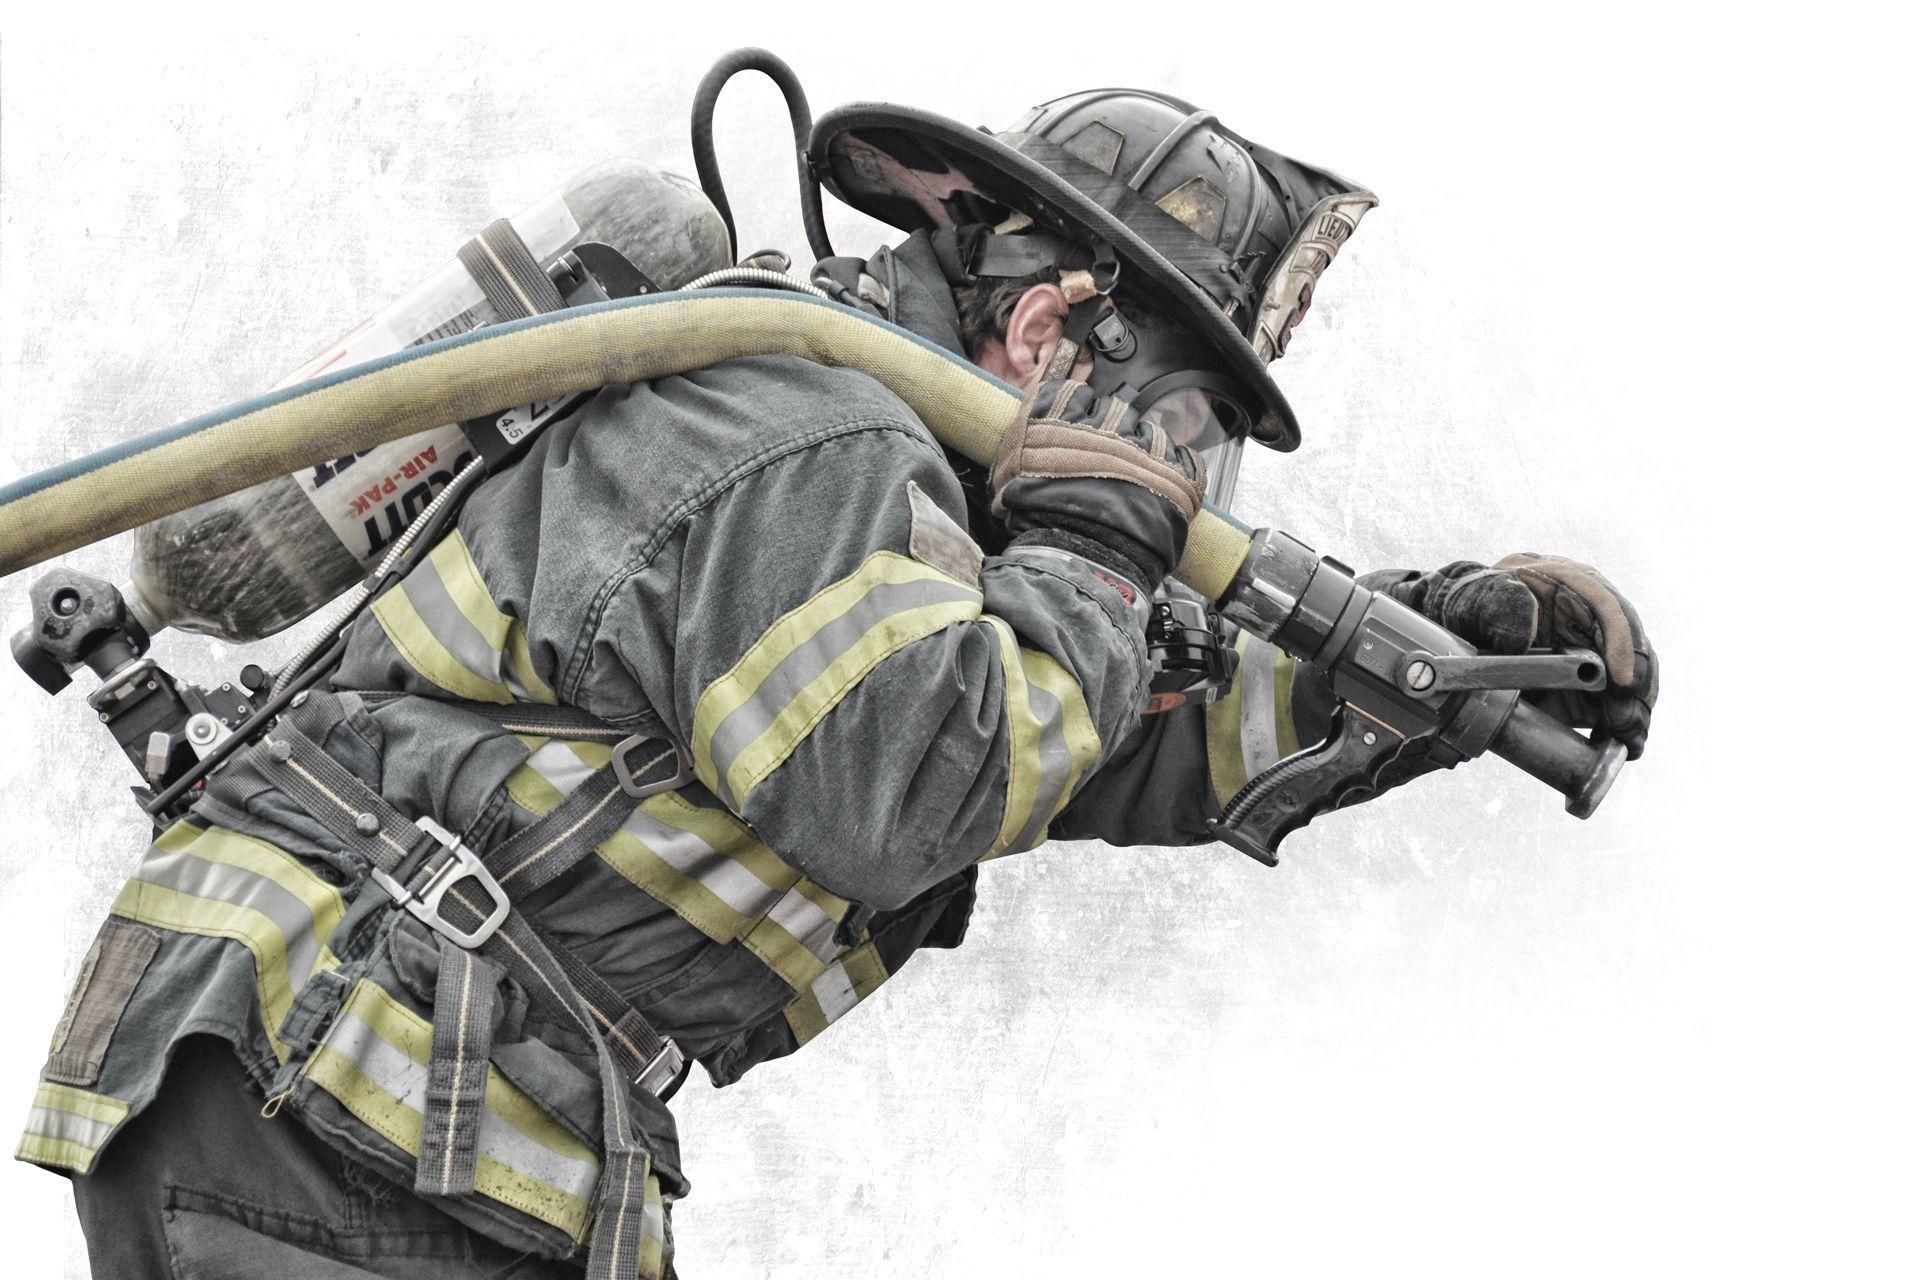 Fire Department Wallpaper. Fire Department Background and Image